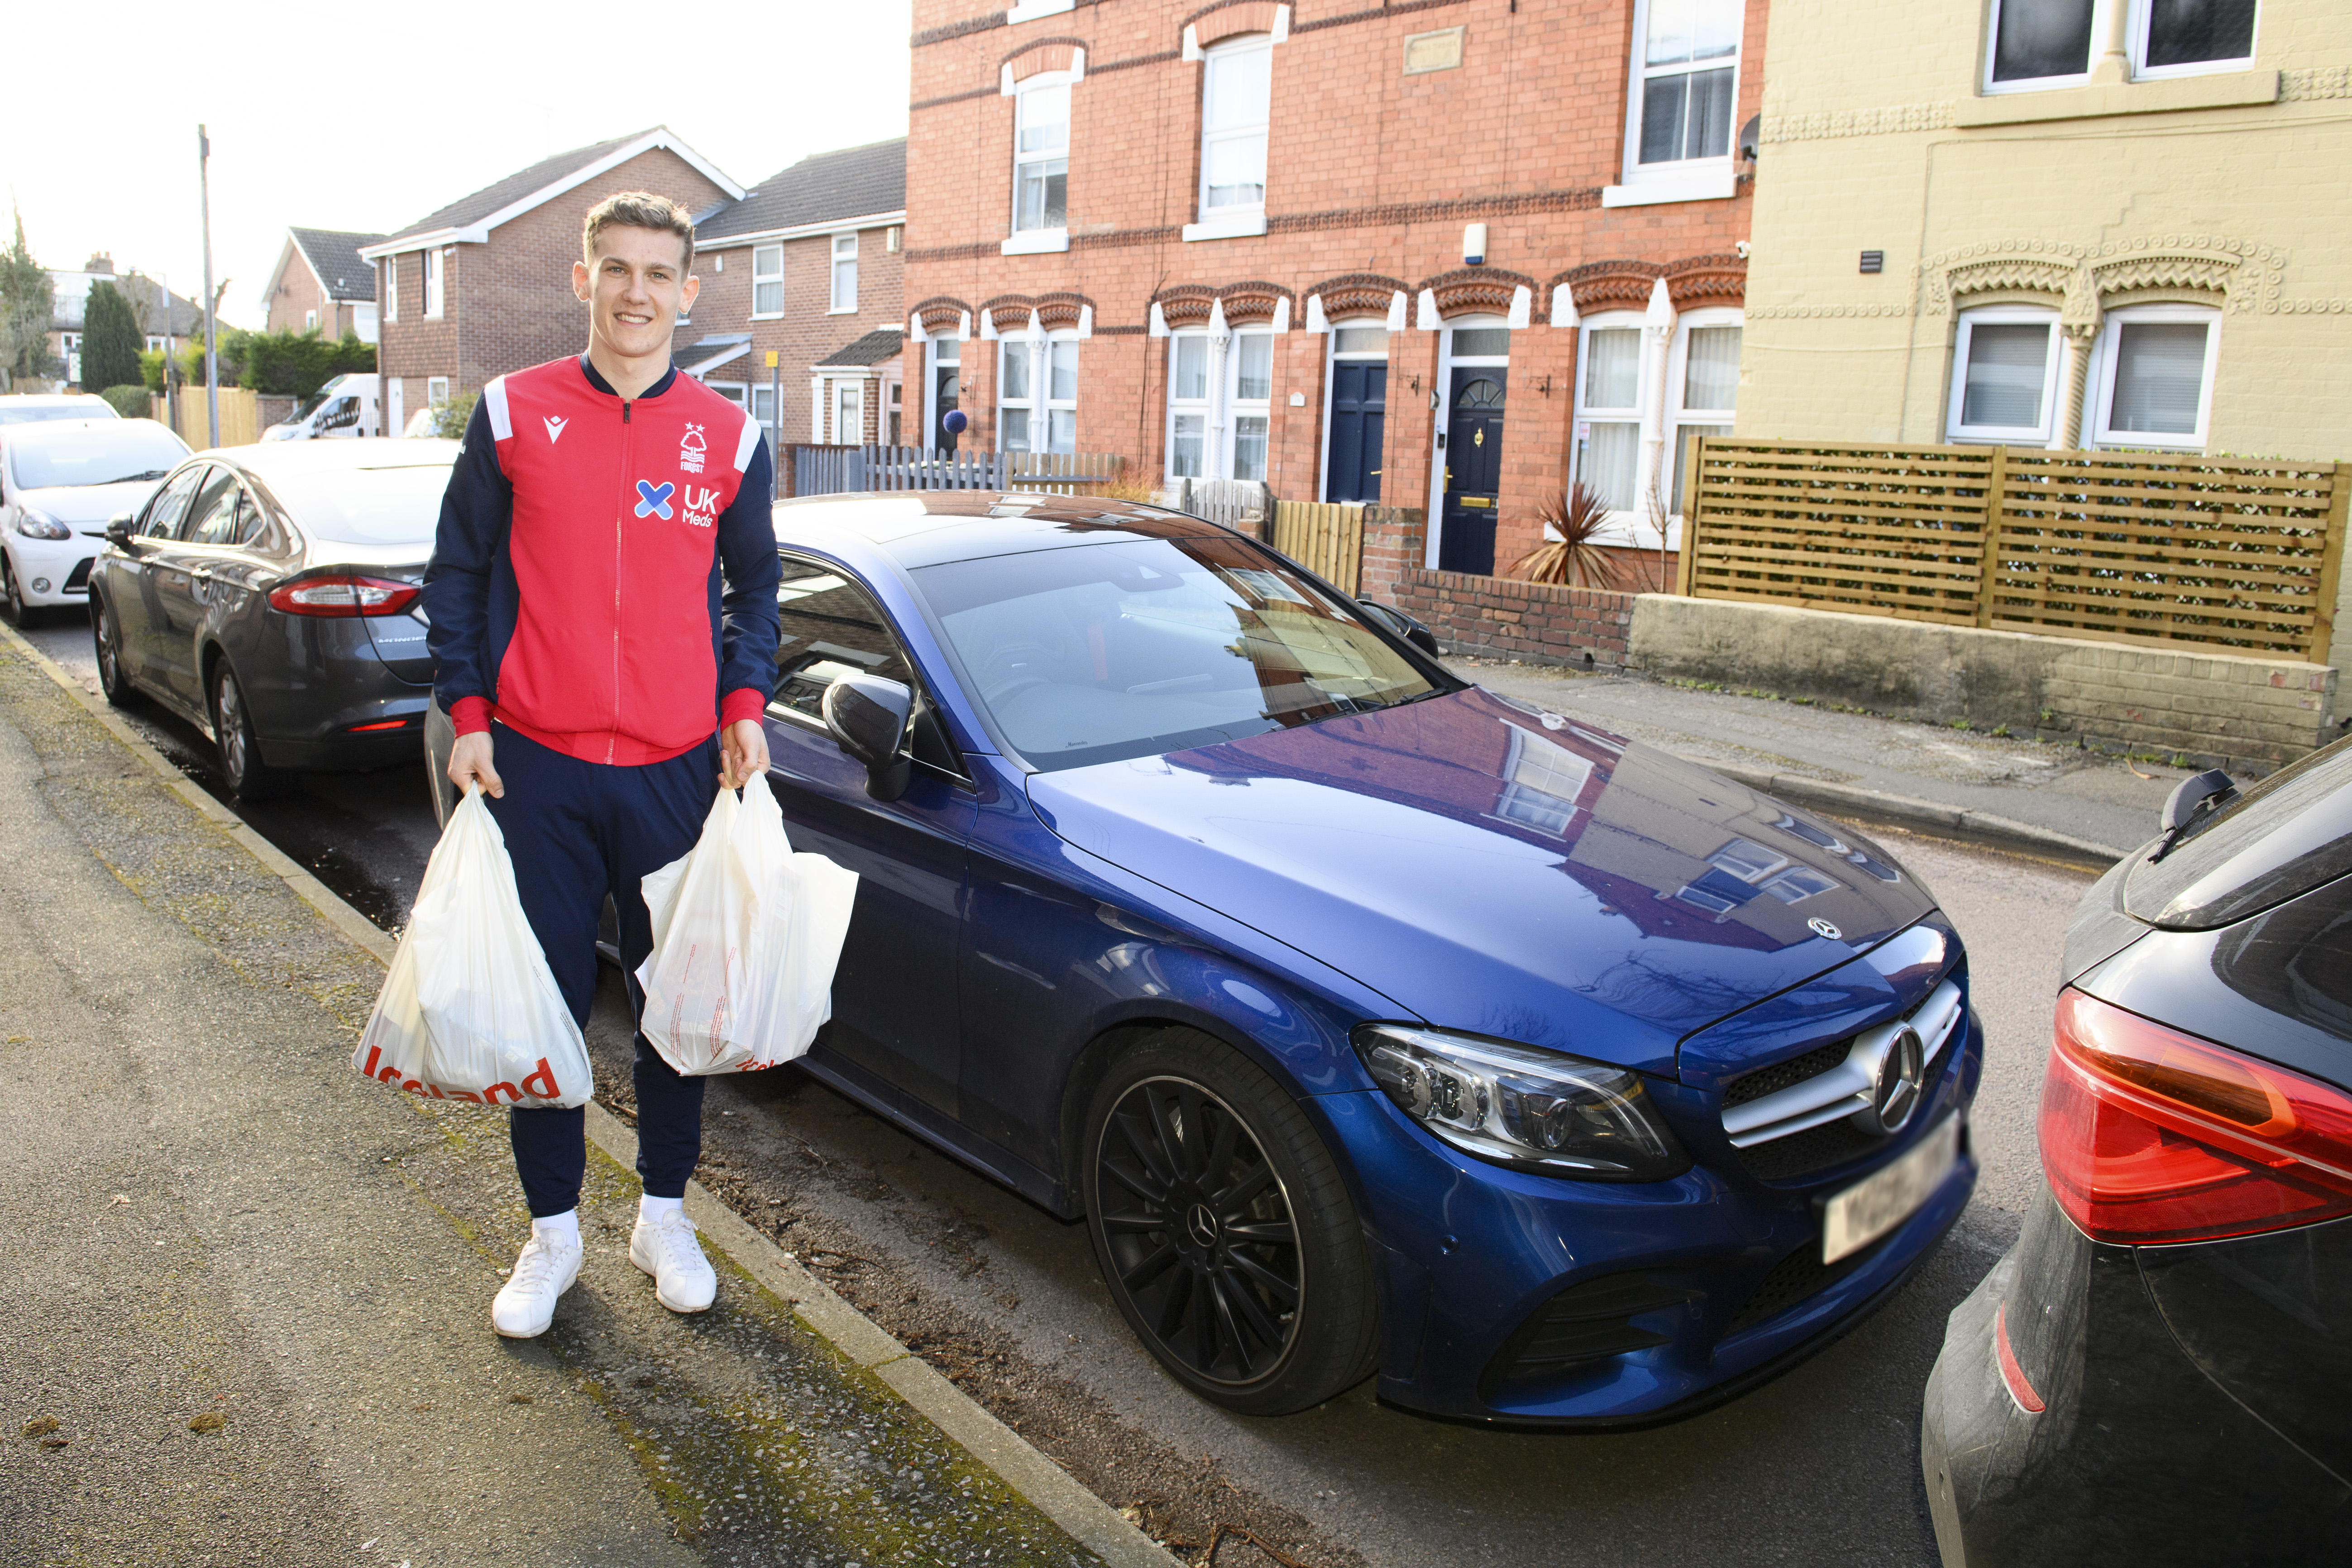 Ryan Yates delivered the one millionth food parcel 